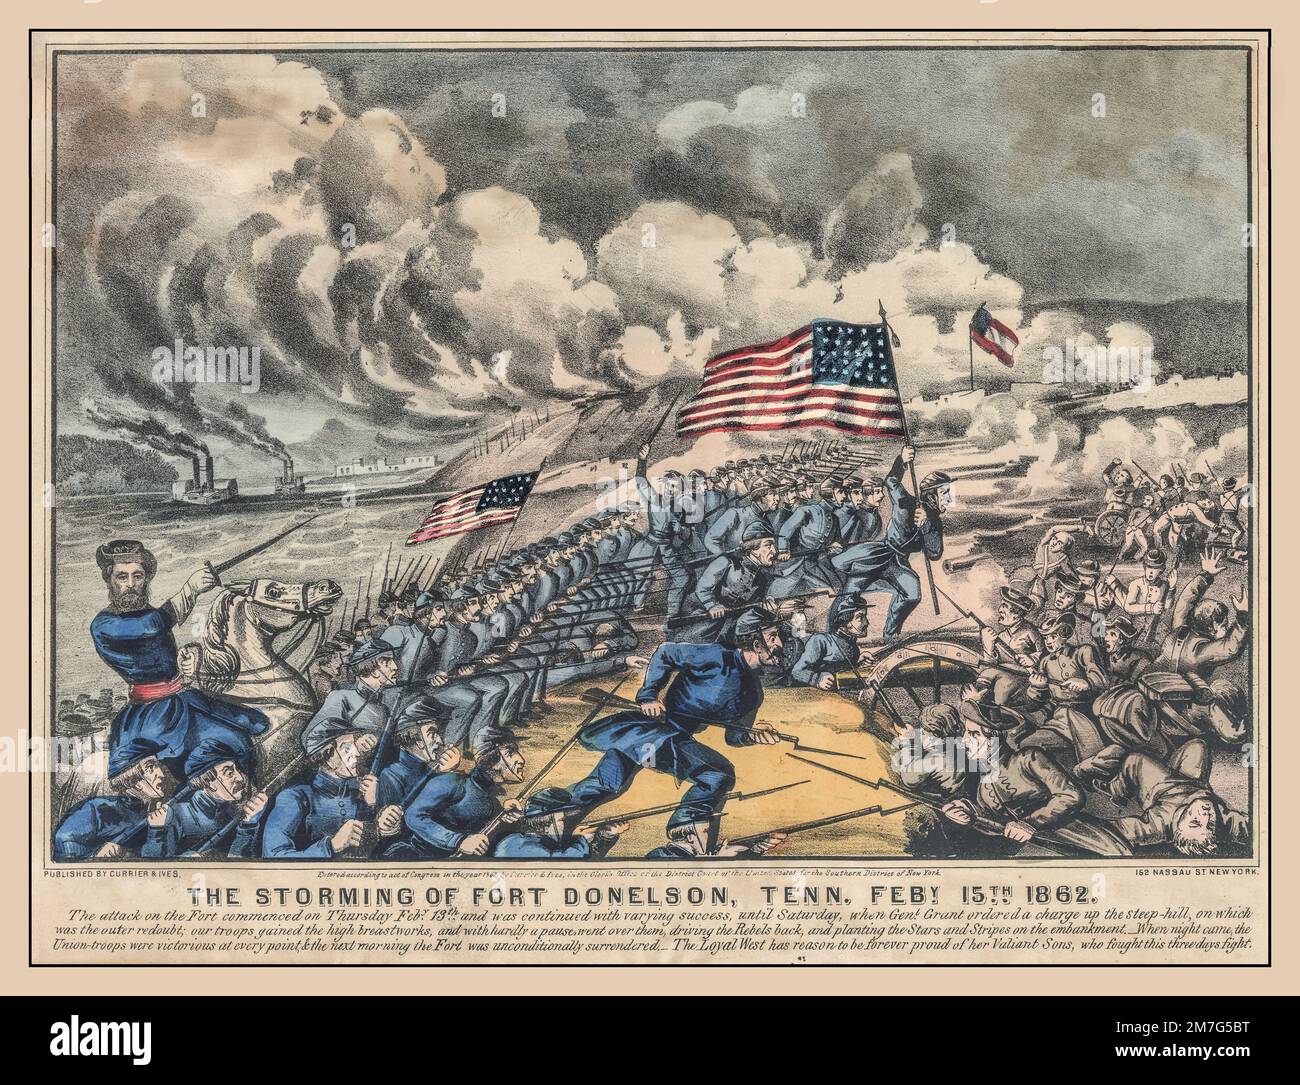 AMERICAN CIVIL WAR LITHOGRAPH  "The Storming Of Fort Donelson, Tennessee . February. 15th 1862." Hand colored lithograph by Currier and Ives, New York, 1862. Stock Photo